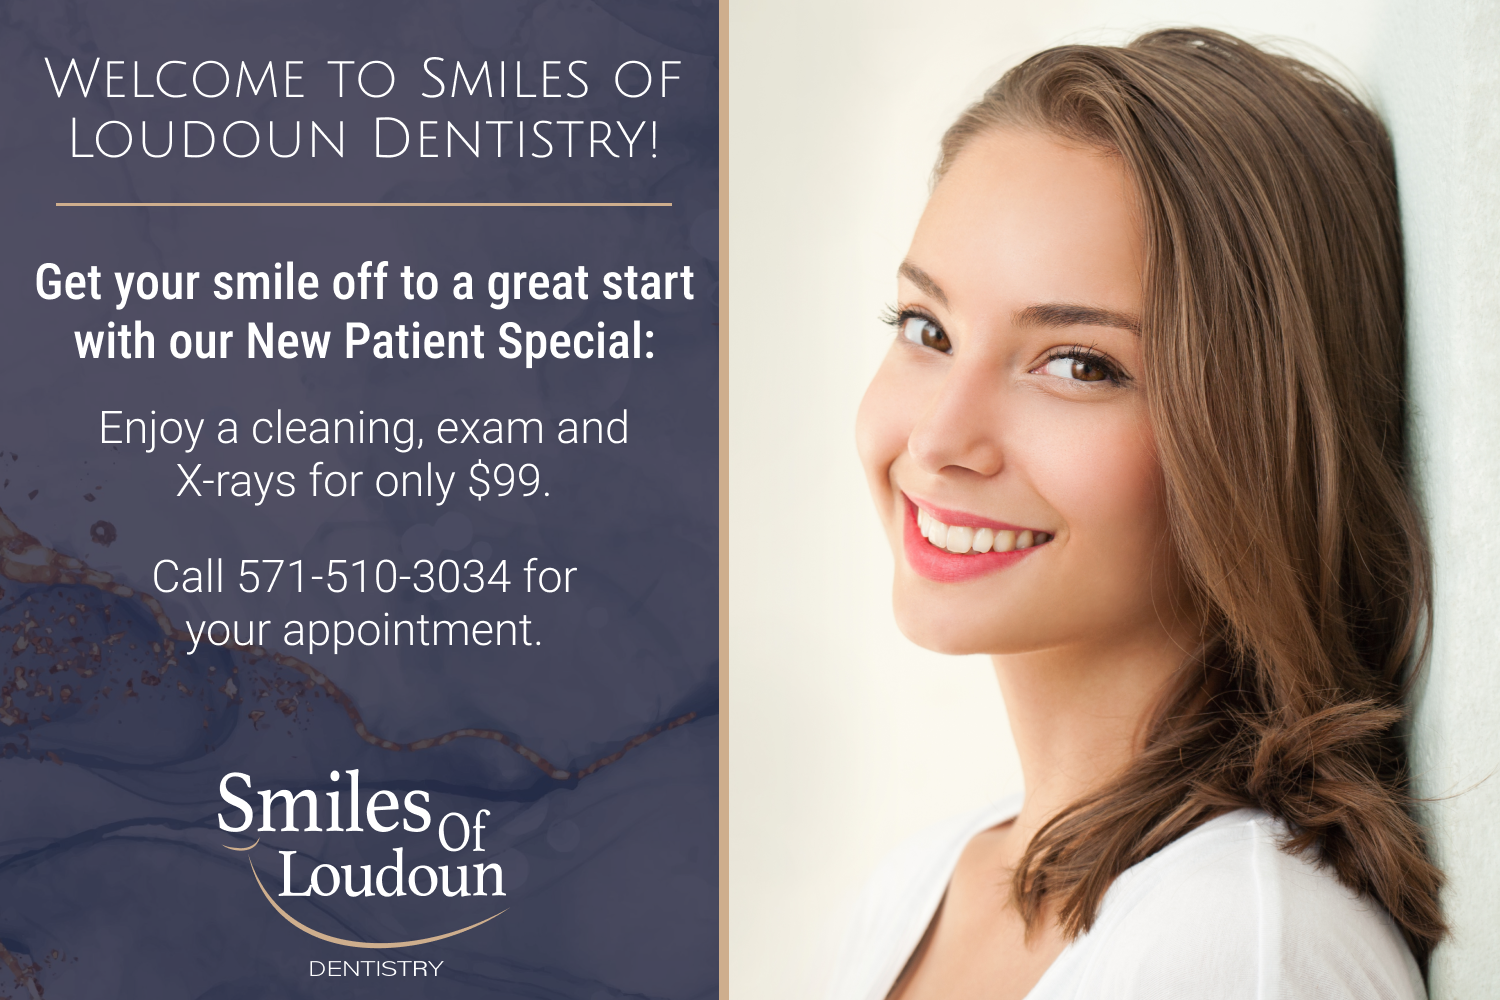 New Patient Special: Enjoy a cleaning, exam and X-rays for only $89